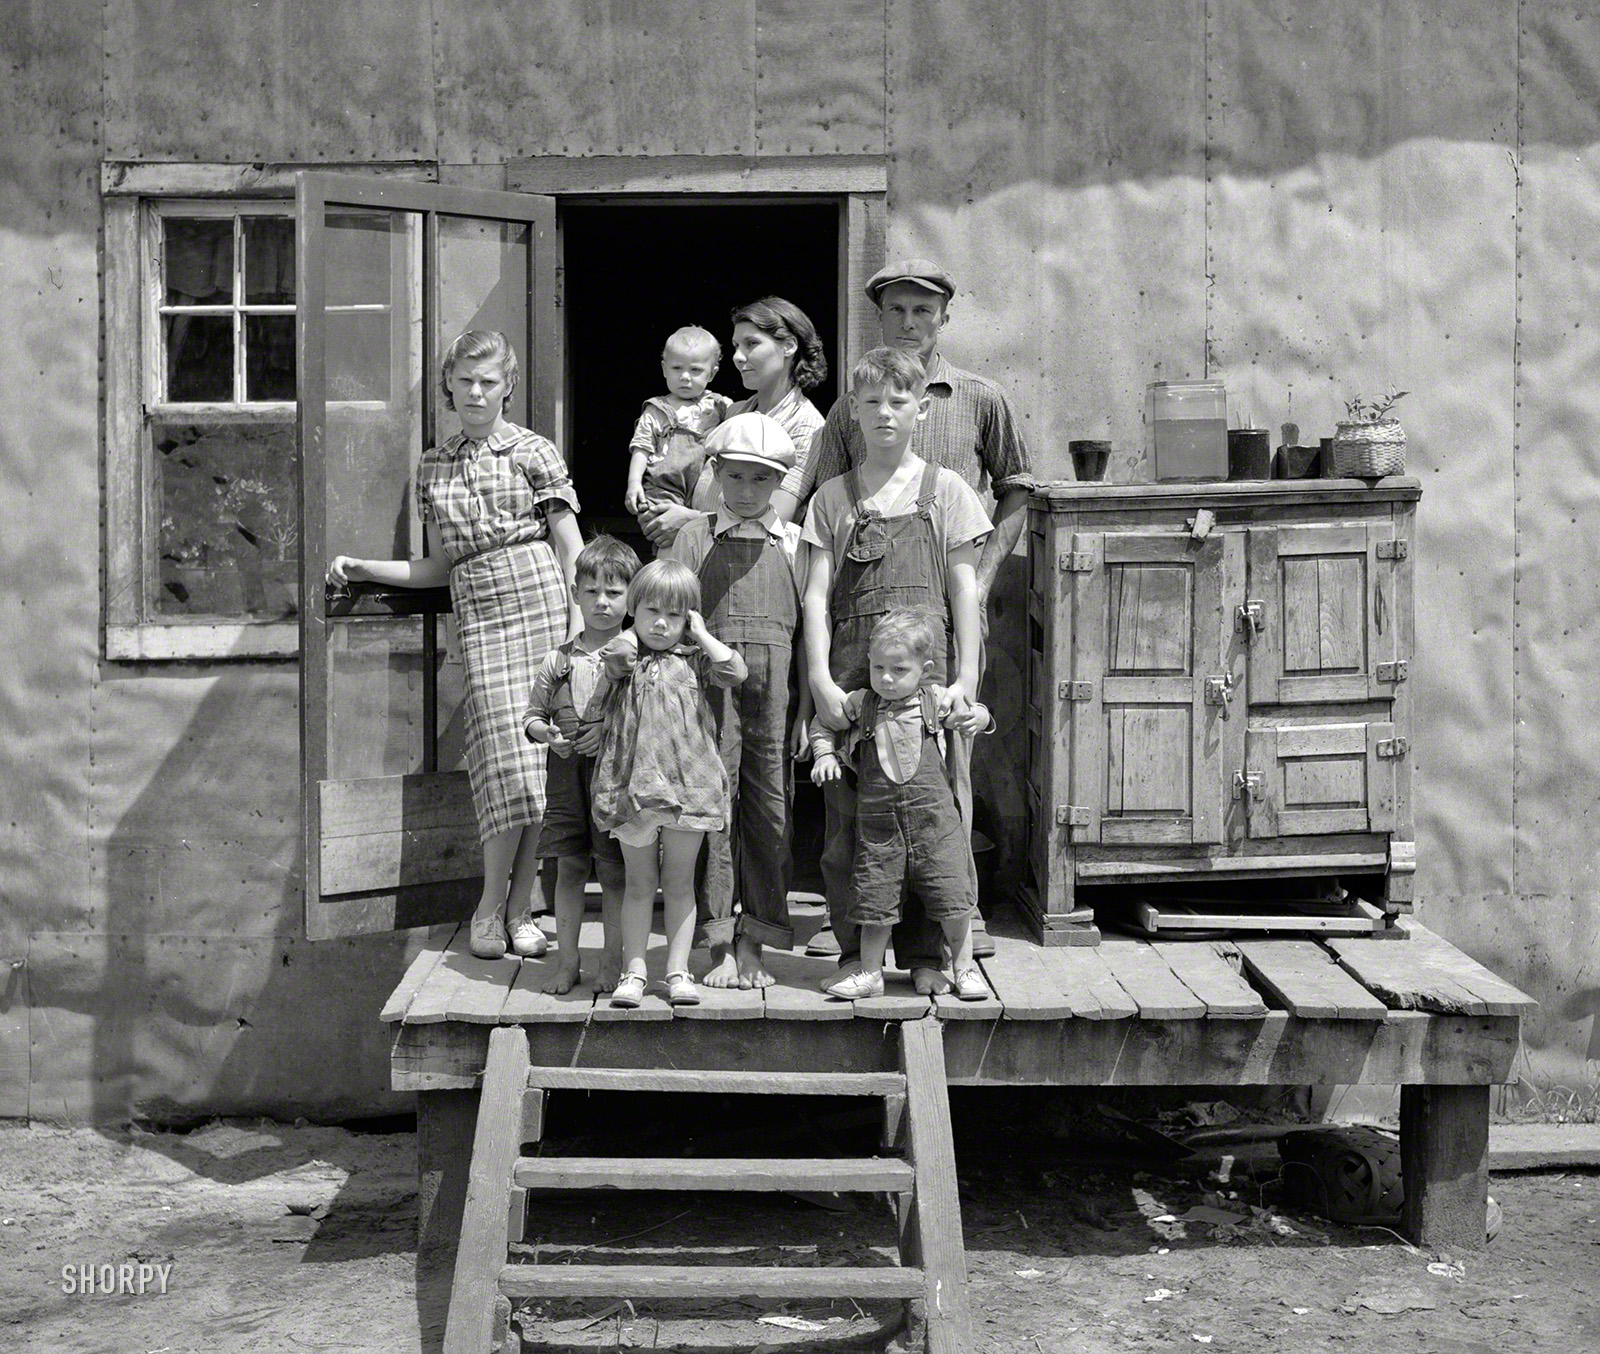 &nbsp; &nbsp; &nbsp; &nbsp; Black River Falls (vicinity), Wisconsin. April-June 1937. Photographs show families who live on small farms in cut-over areas. Dilapidated log cabins and shacks; interior details. Poor families; Bohemian farm families. Few scenes in town.
June 1937. "Ray Allen family near Black River Falls, Wisconsin." Medium format negative by Russell Lee for the Resettlement Administration. View full size.